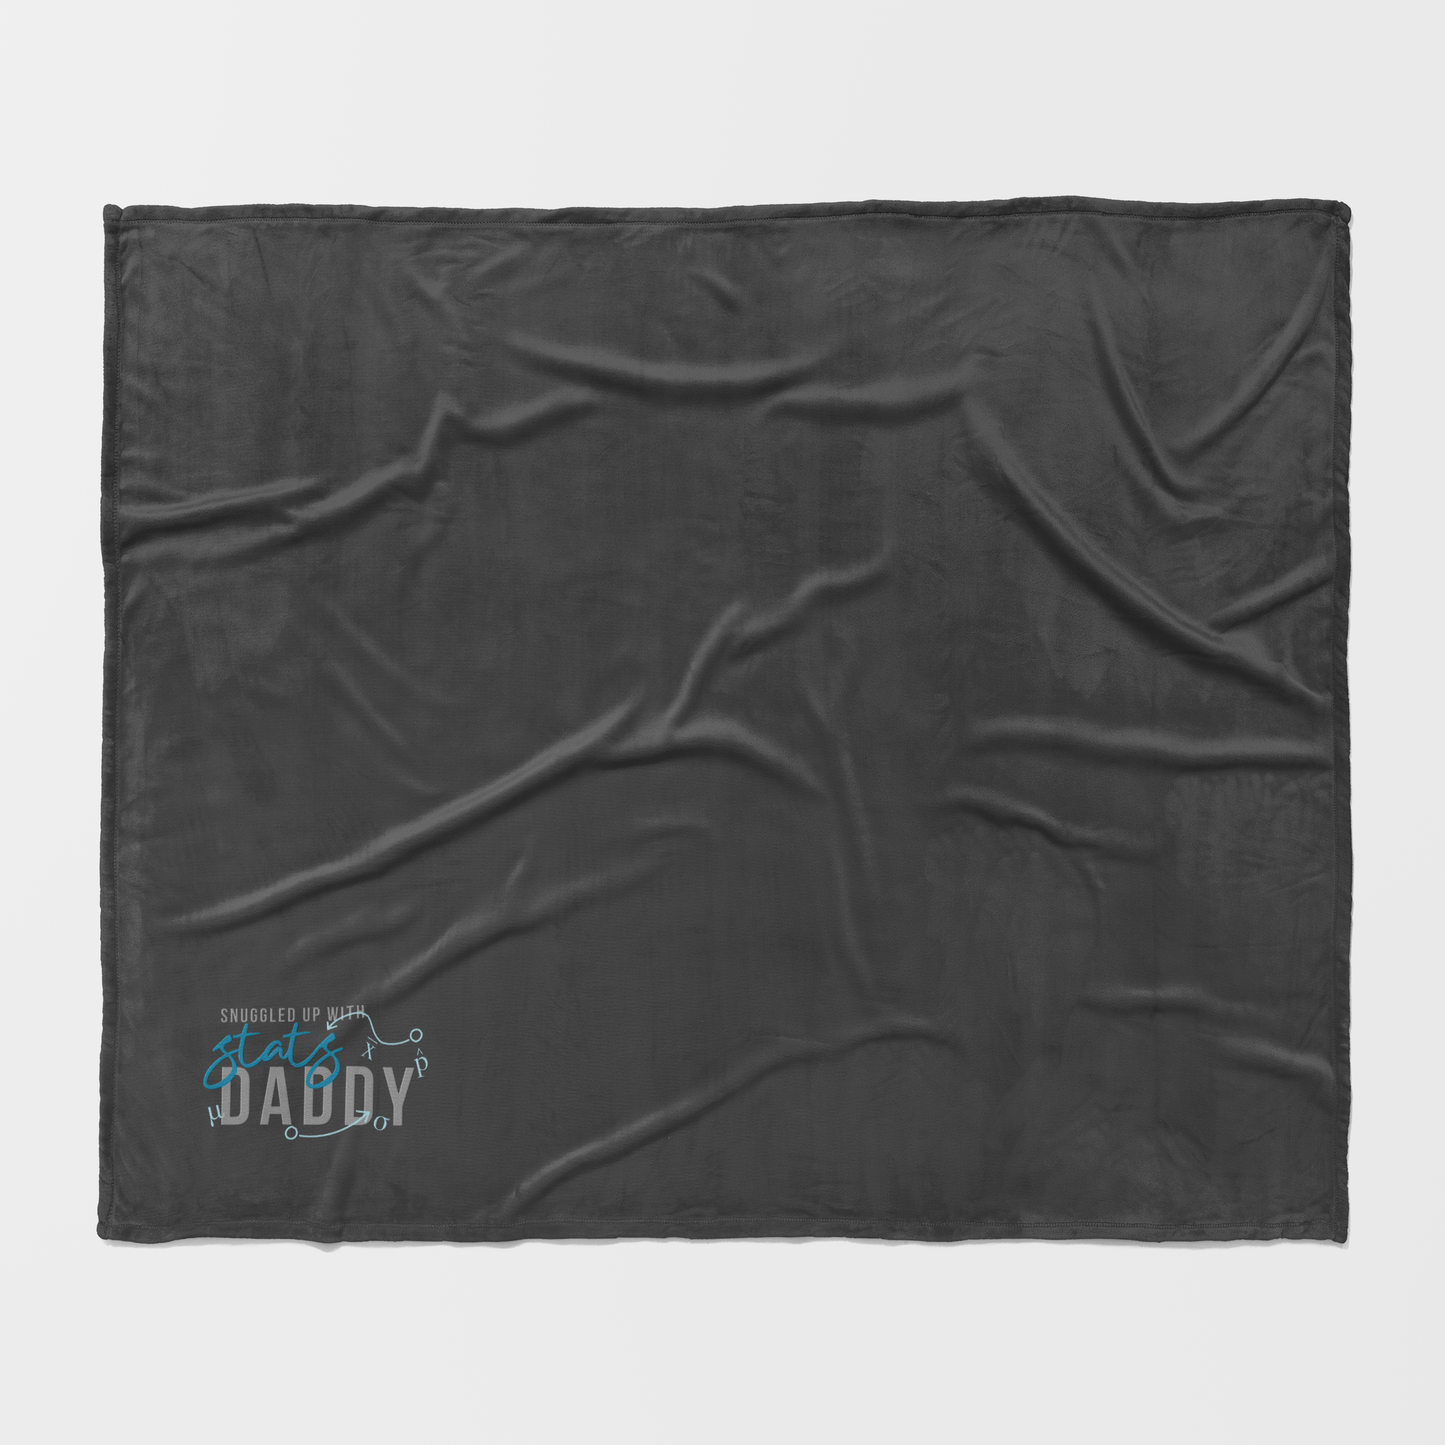 Stats Daddy Sweatshirt Blanket - Officially Licensed Boys of Lake Chapel Series